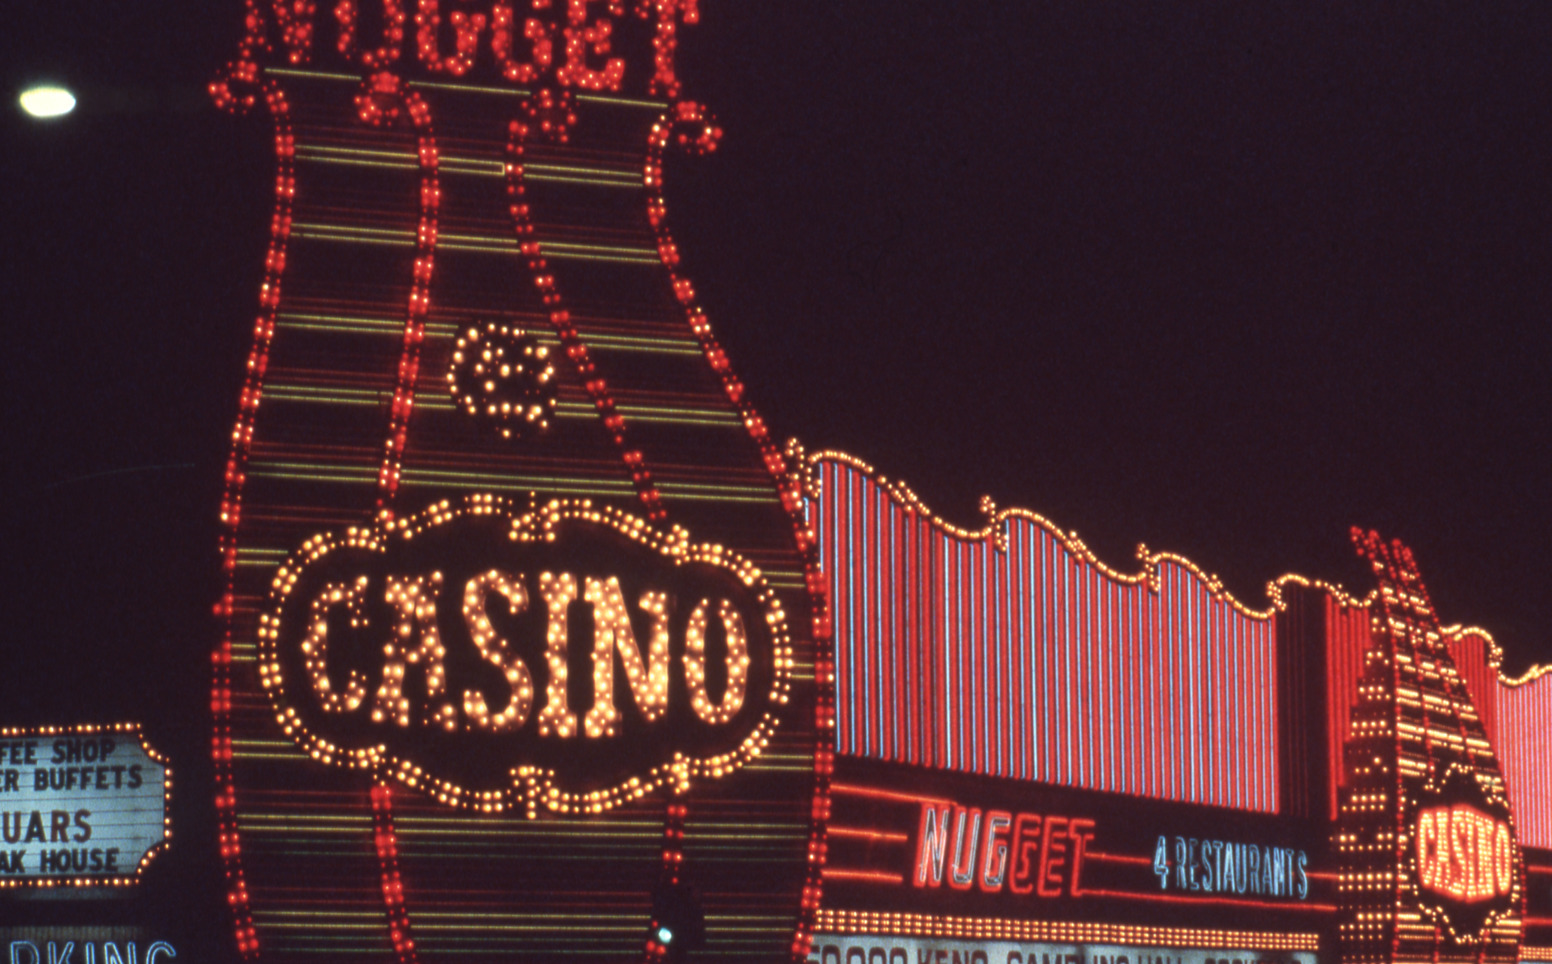 The Nugget Casino lettering and wall mounted signs, Carson City, Nevada: photographic print